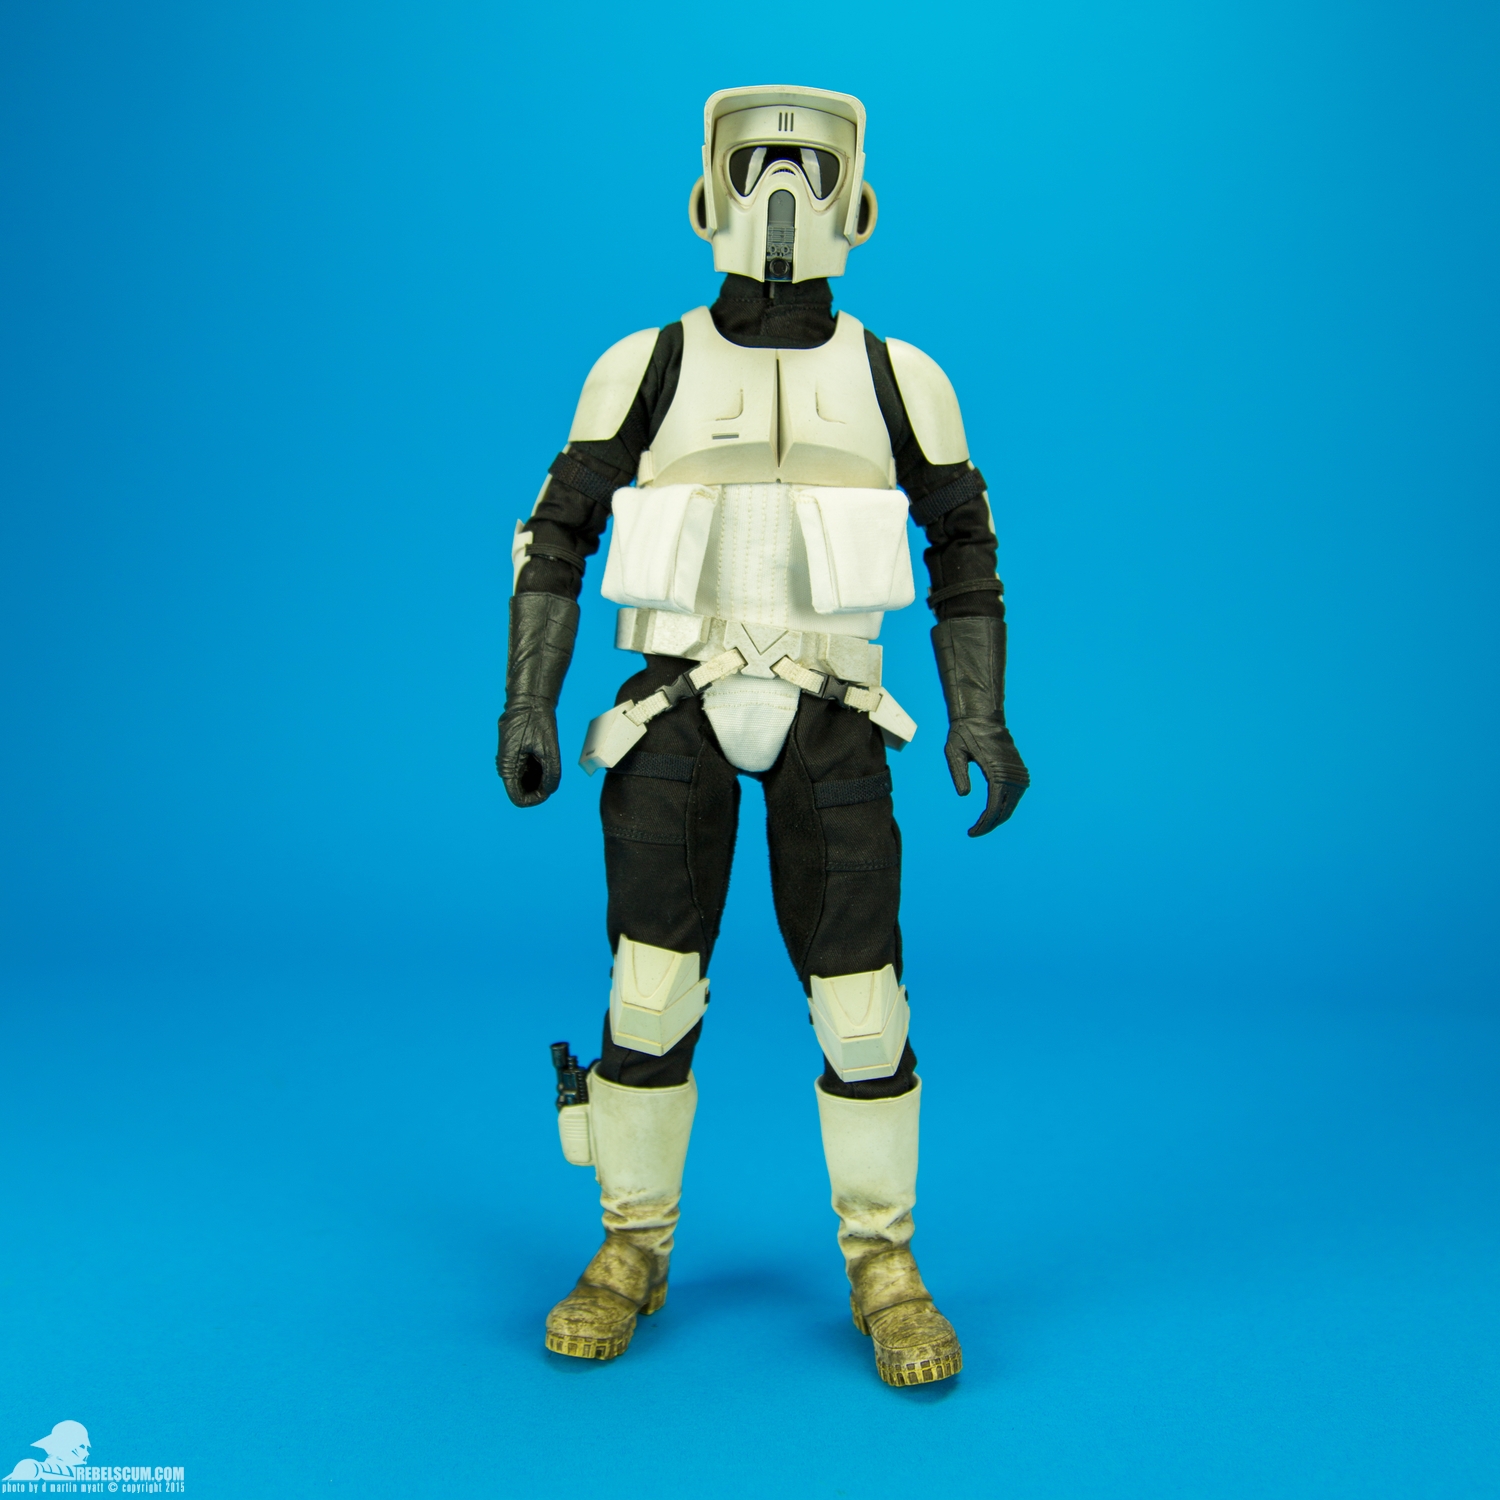 Scout-Trooper-Sixth-Scale-Figure-Sideshow-Collectibles-001.jpg